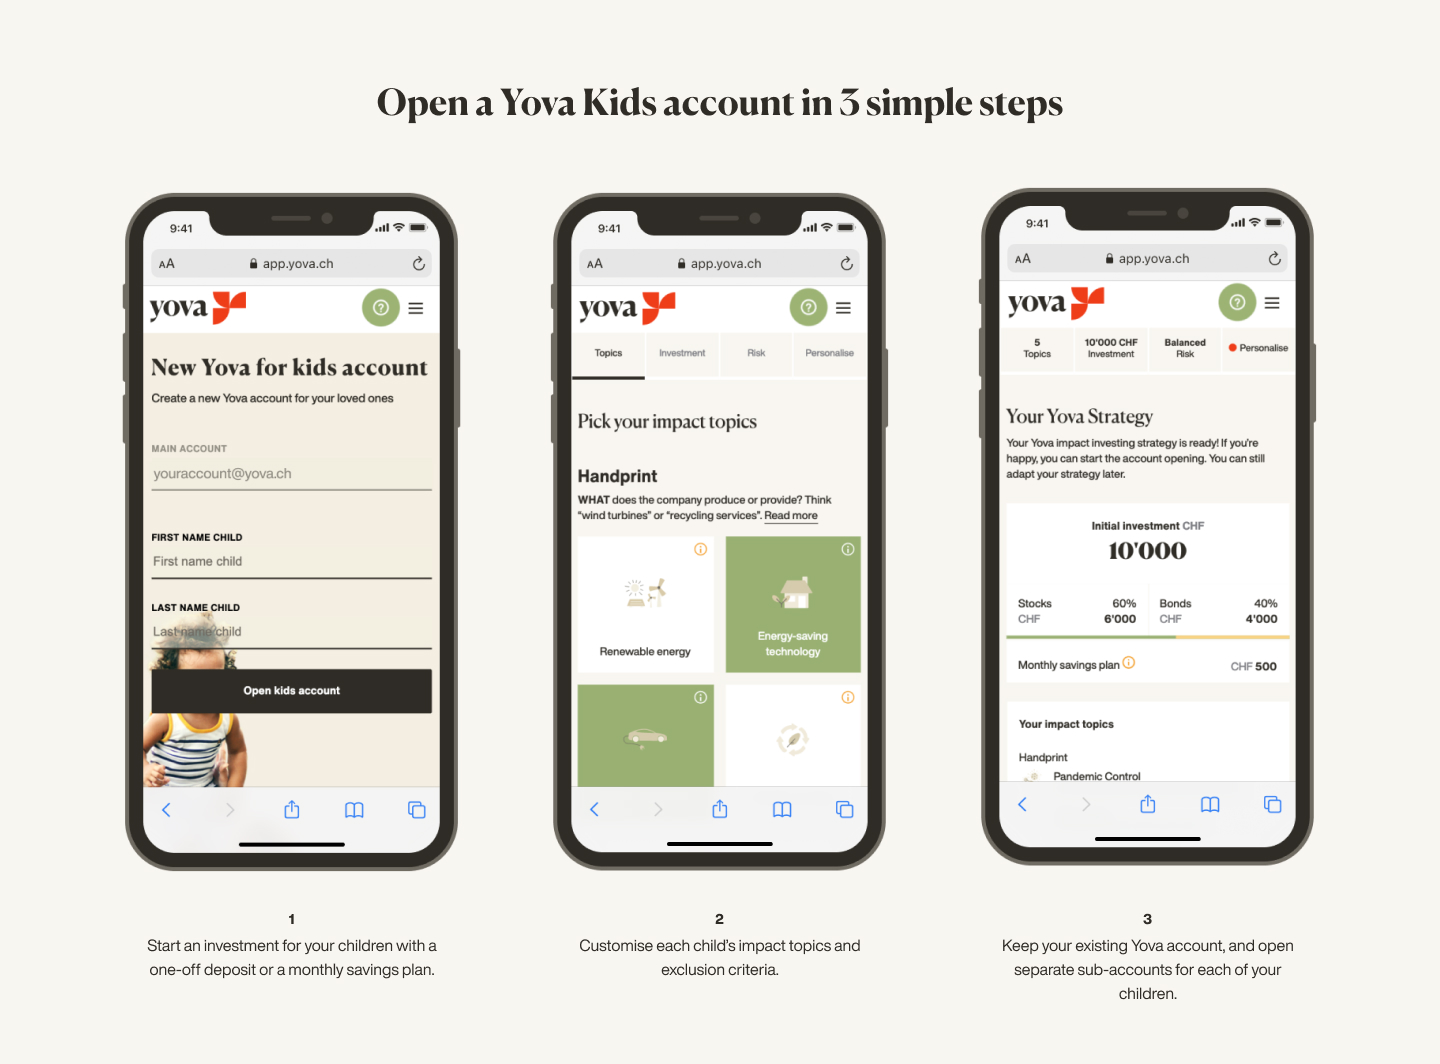 Image showing the three easy steps for opening an account for kids